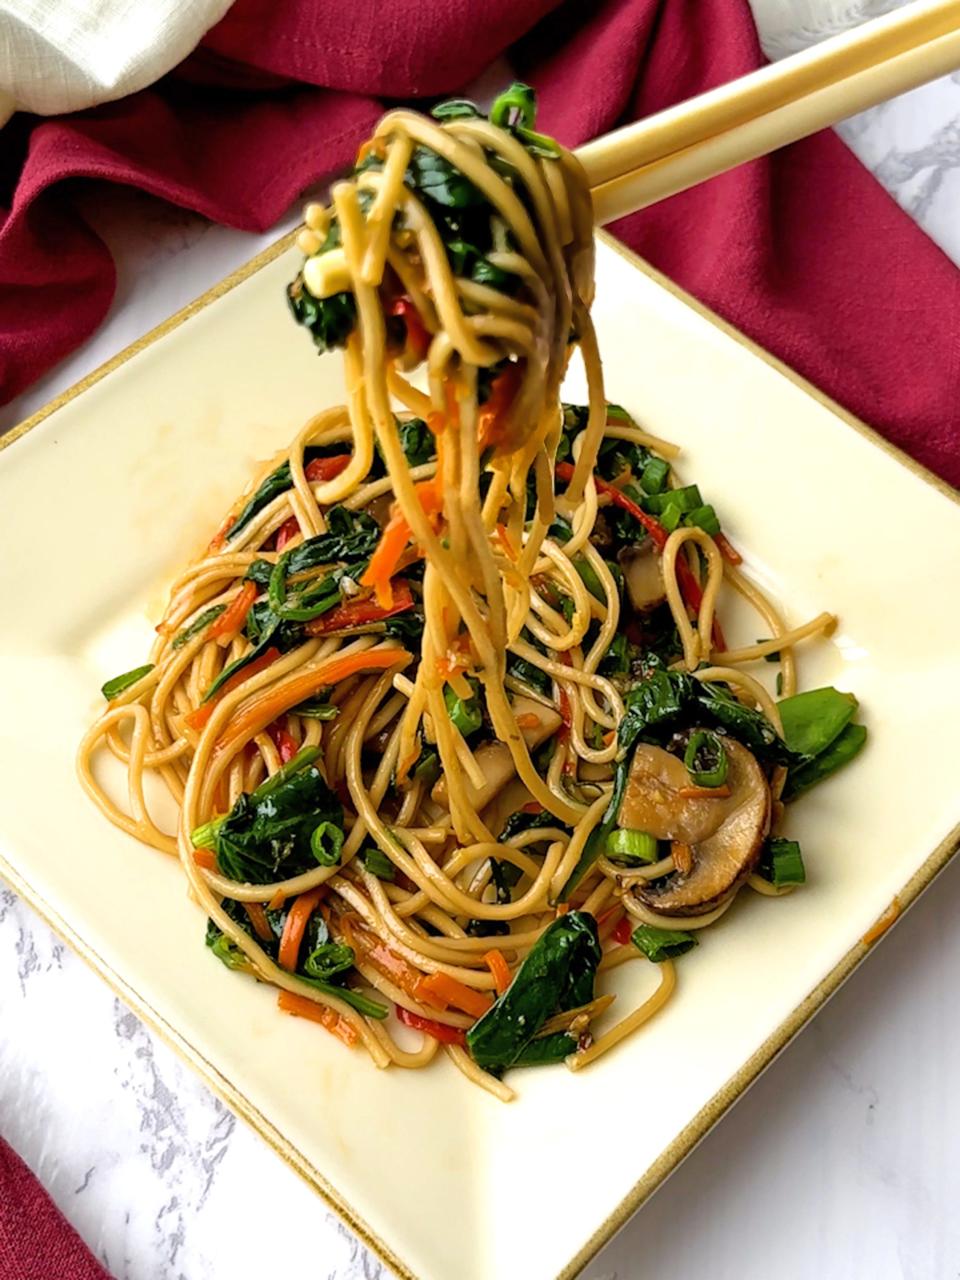 Dress up Vegetable Lo Mein with chicken, shrimp, pork, etc., or mix up the vegetables by adding broccoli florets, celery, or bean sprouts.